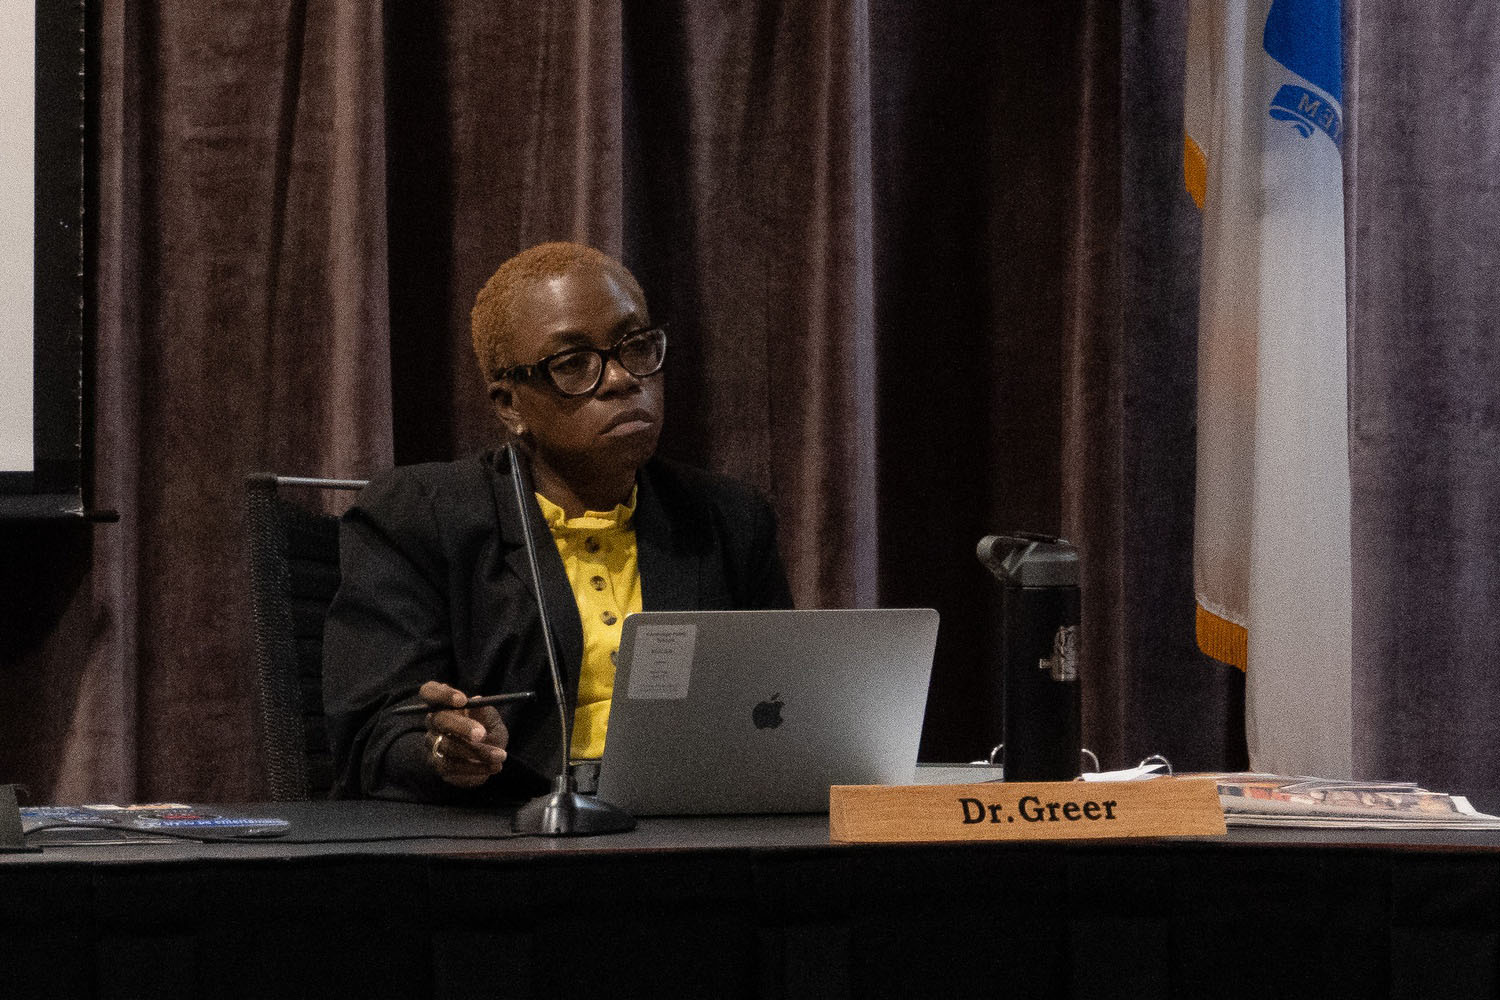 Superintendent Victoria L. Greer sits at a meeting of the Cambridge School Committee in the Cambridge Rindge and Latin school. Nearly 30 parents demanded change from Greer and district leadership during that meeting.